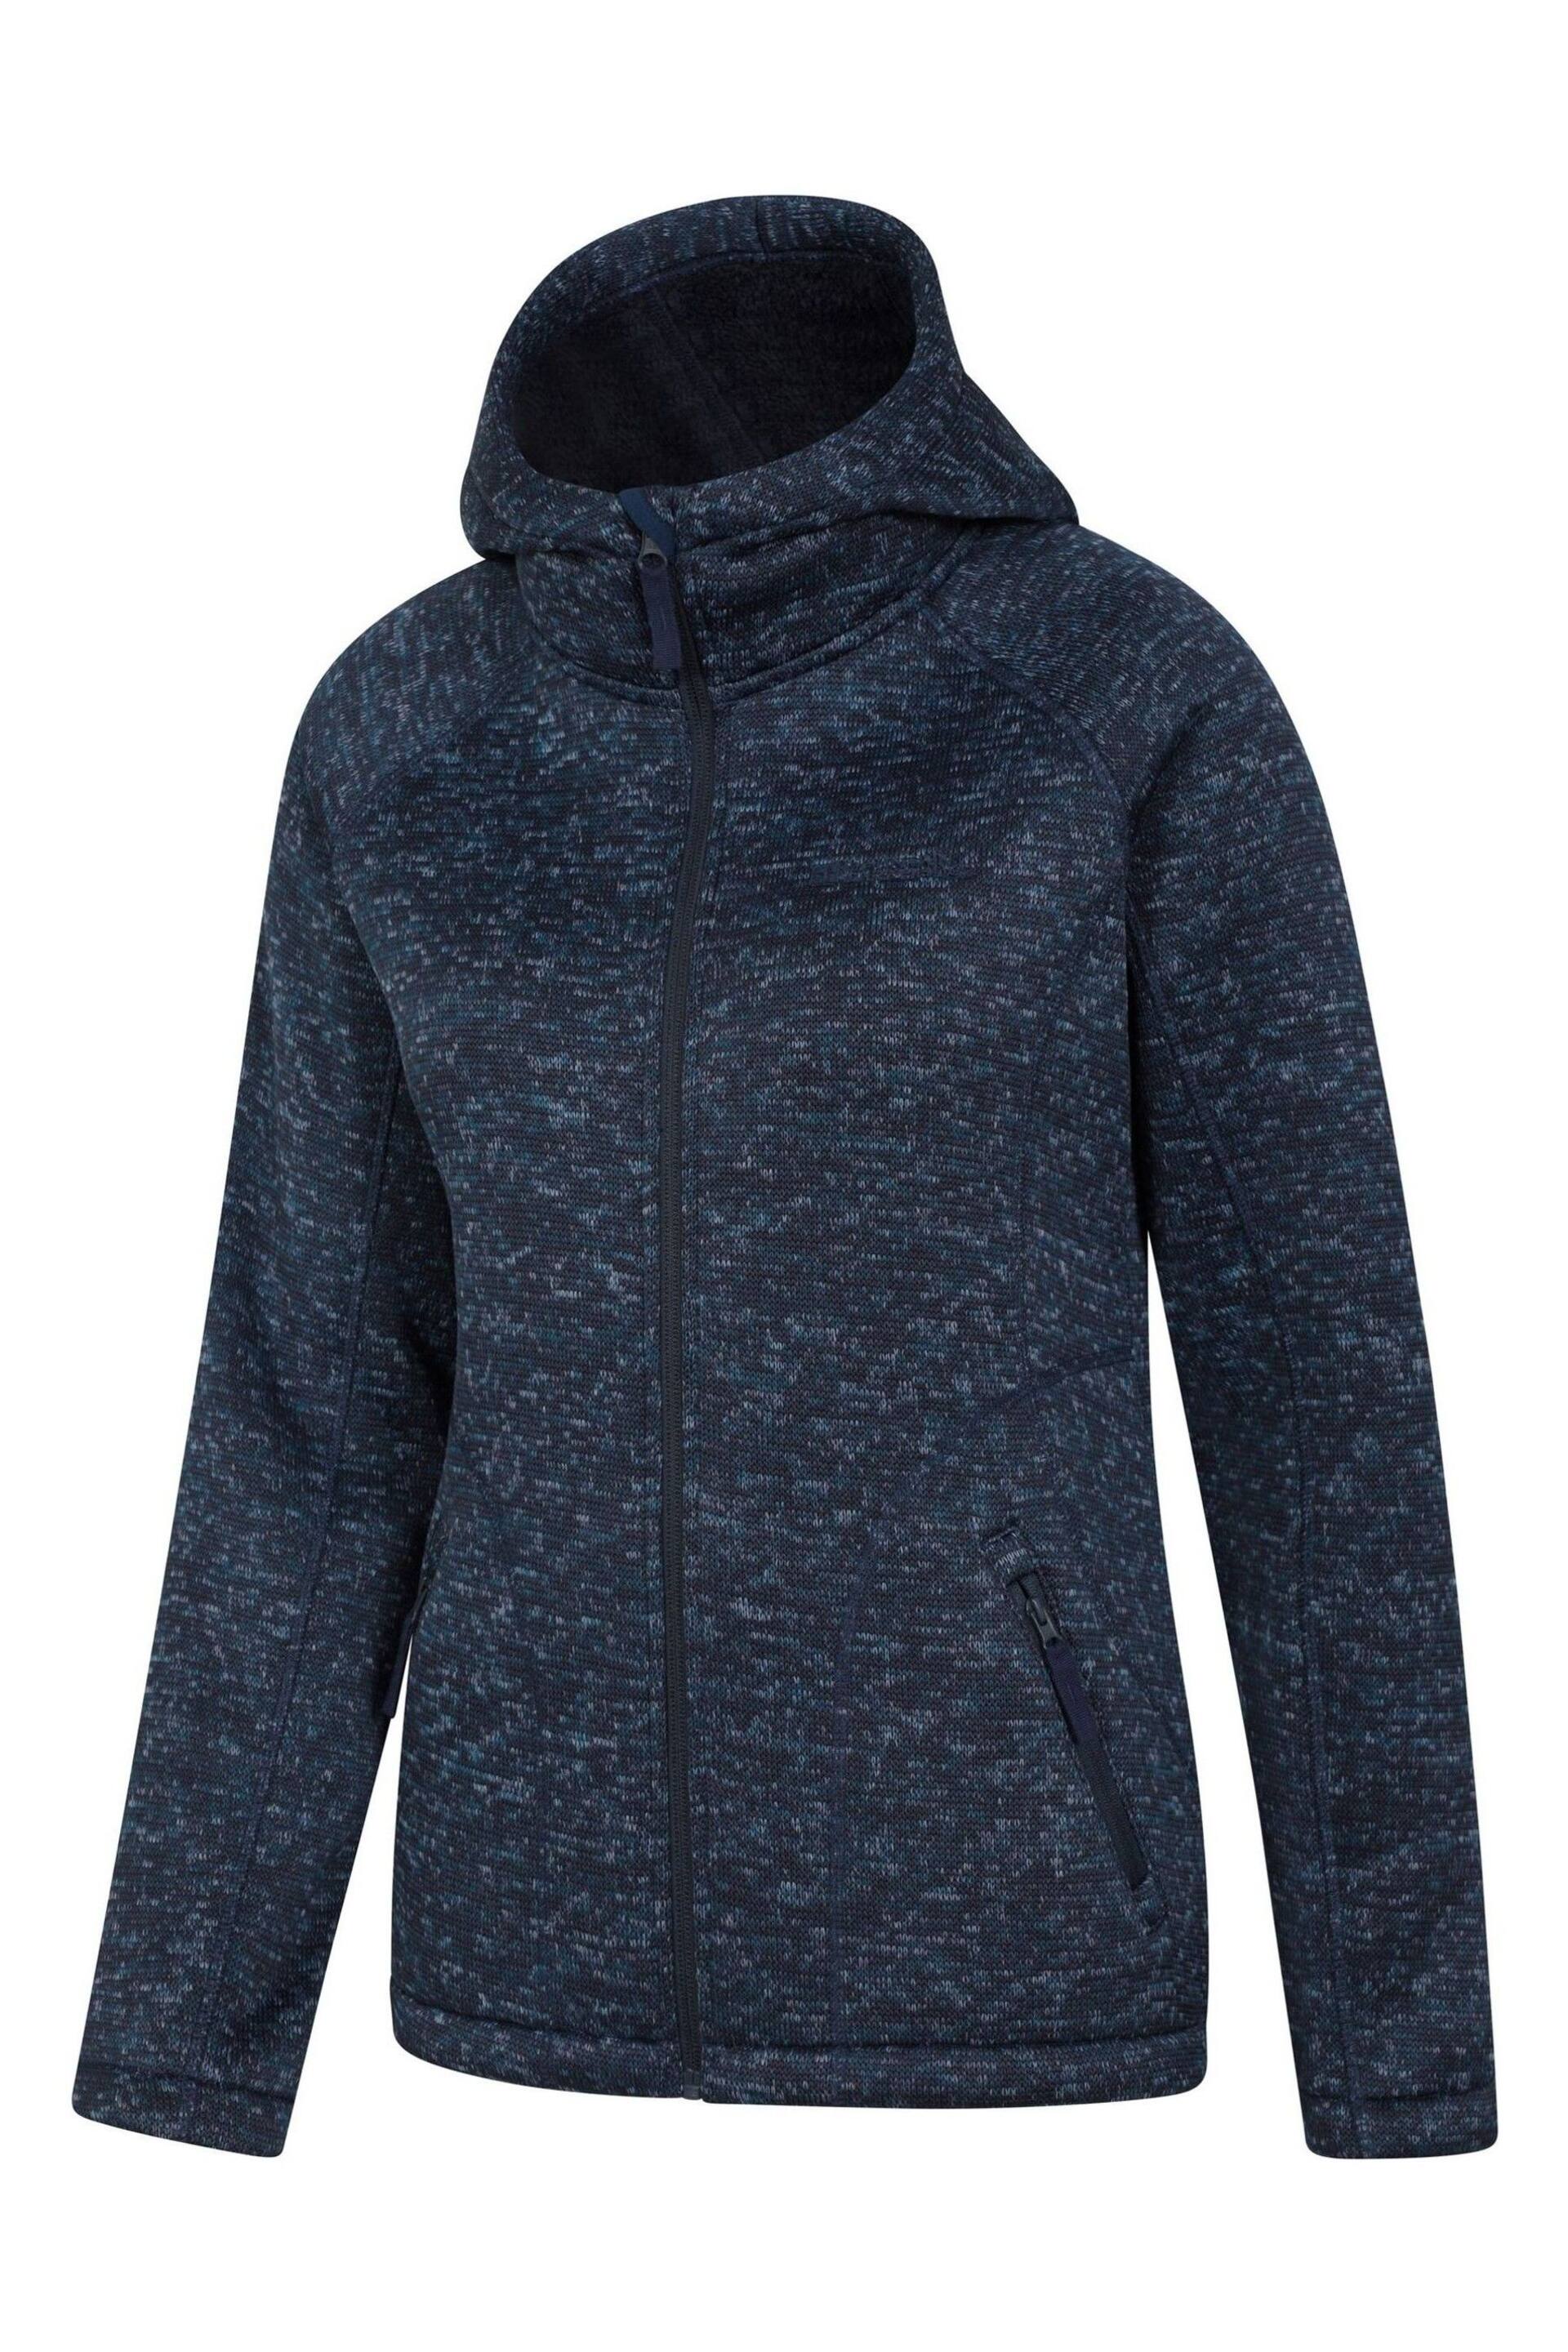 Mountain Warehouse Navy Blue Nevis Sherpa Lined Hoodie - Image 4 of 5